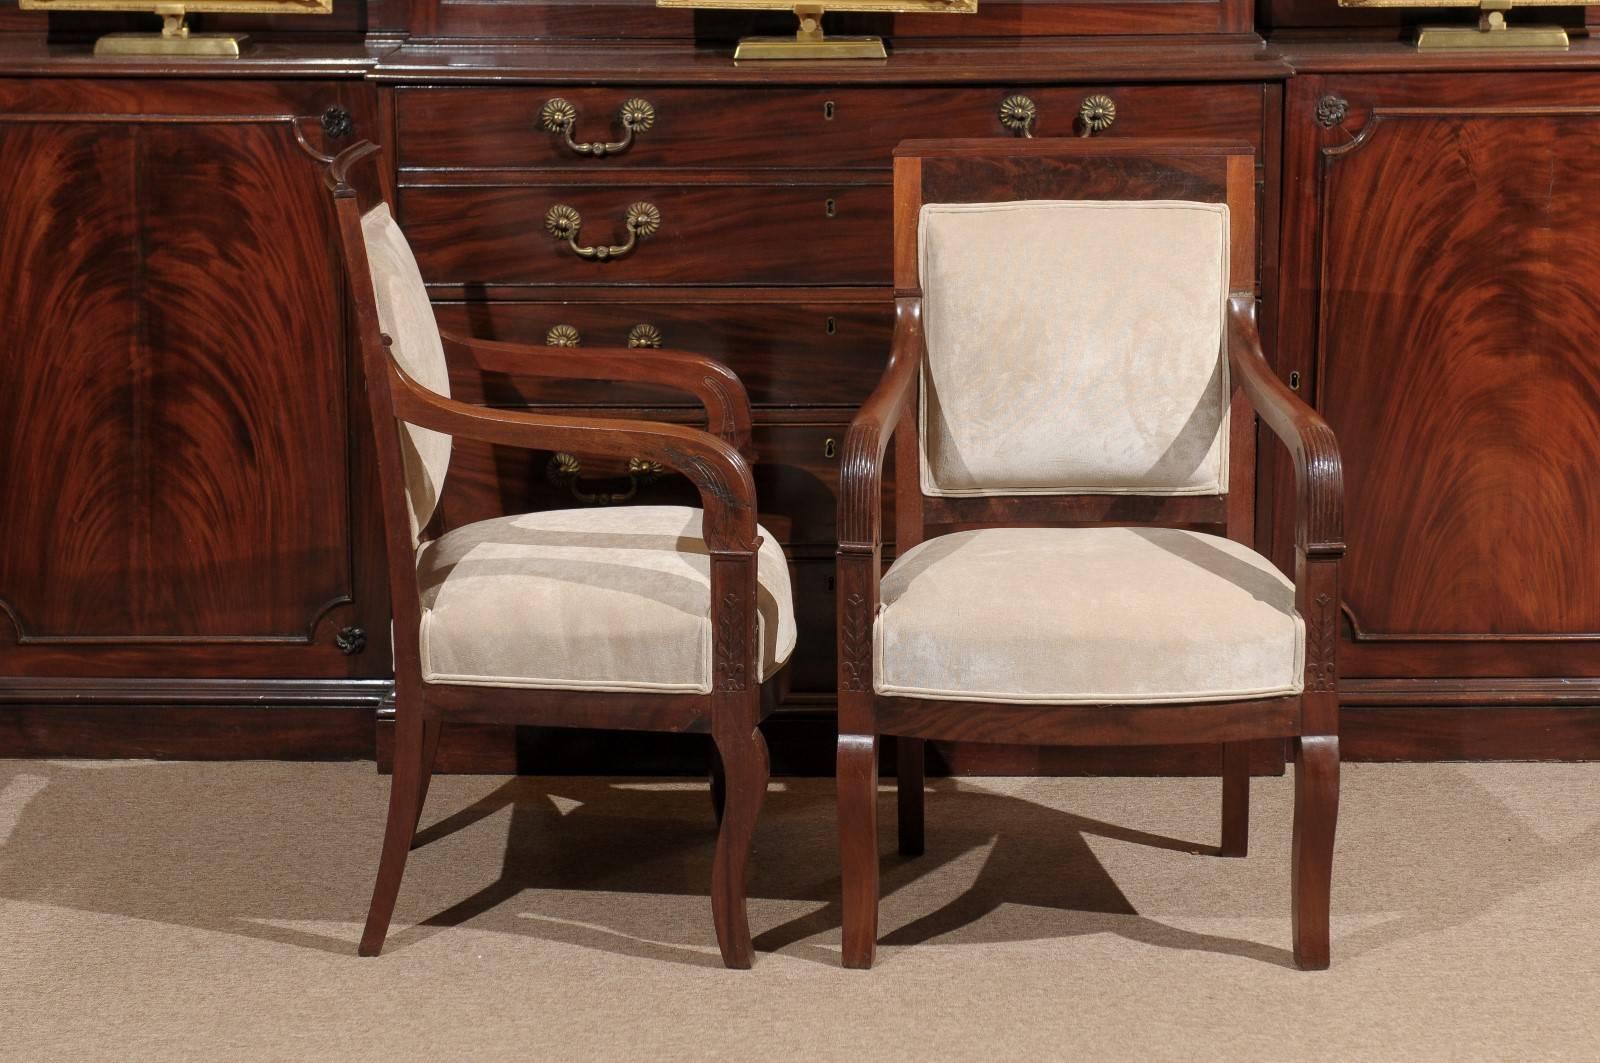 Pair of French Empire Mahogany Fauteuils, 19th Century, circa 1810 For Sale 1